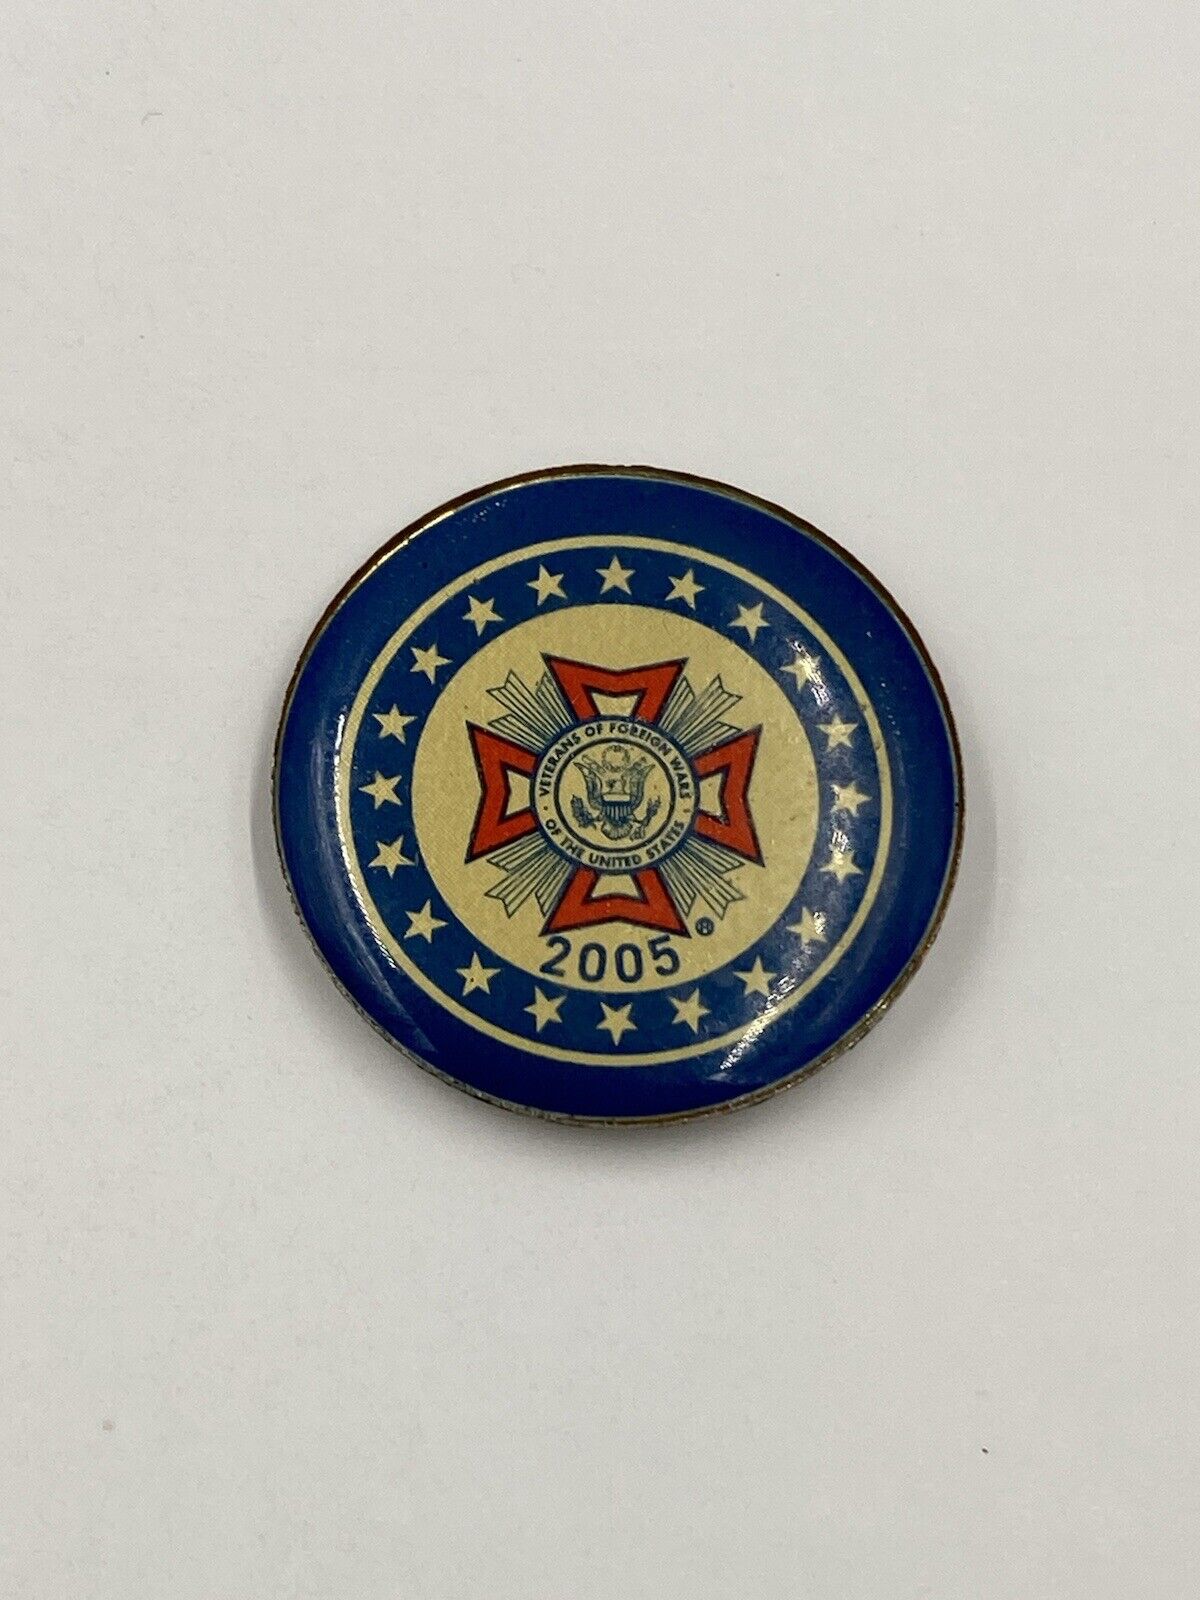 Veterans of Foreign Wars of the United States Lapel Pin Brooch 2005